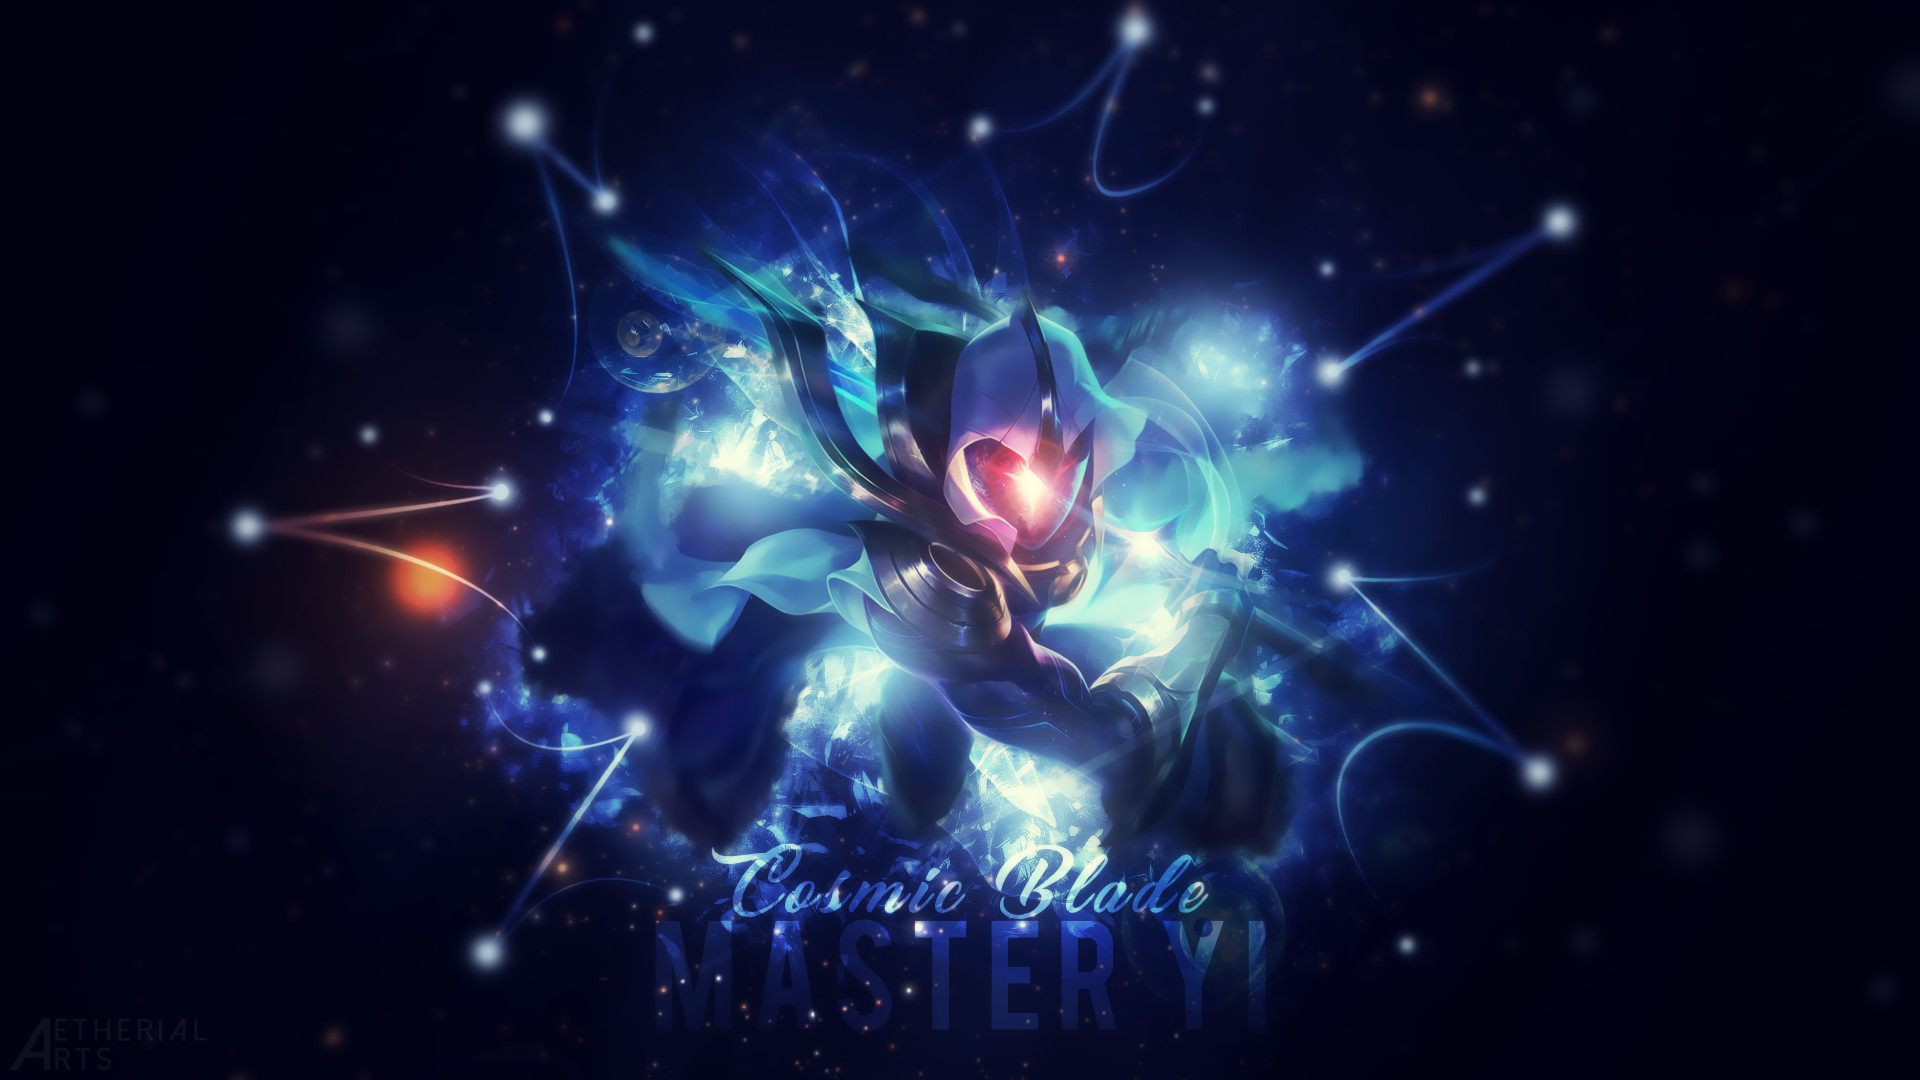 1920x1080 ... Cosmic Blade Master Yi Wallpaper by AetherialArts